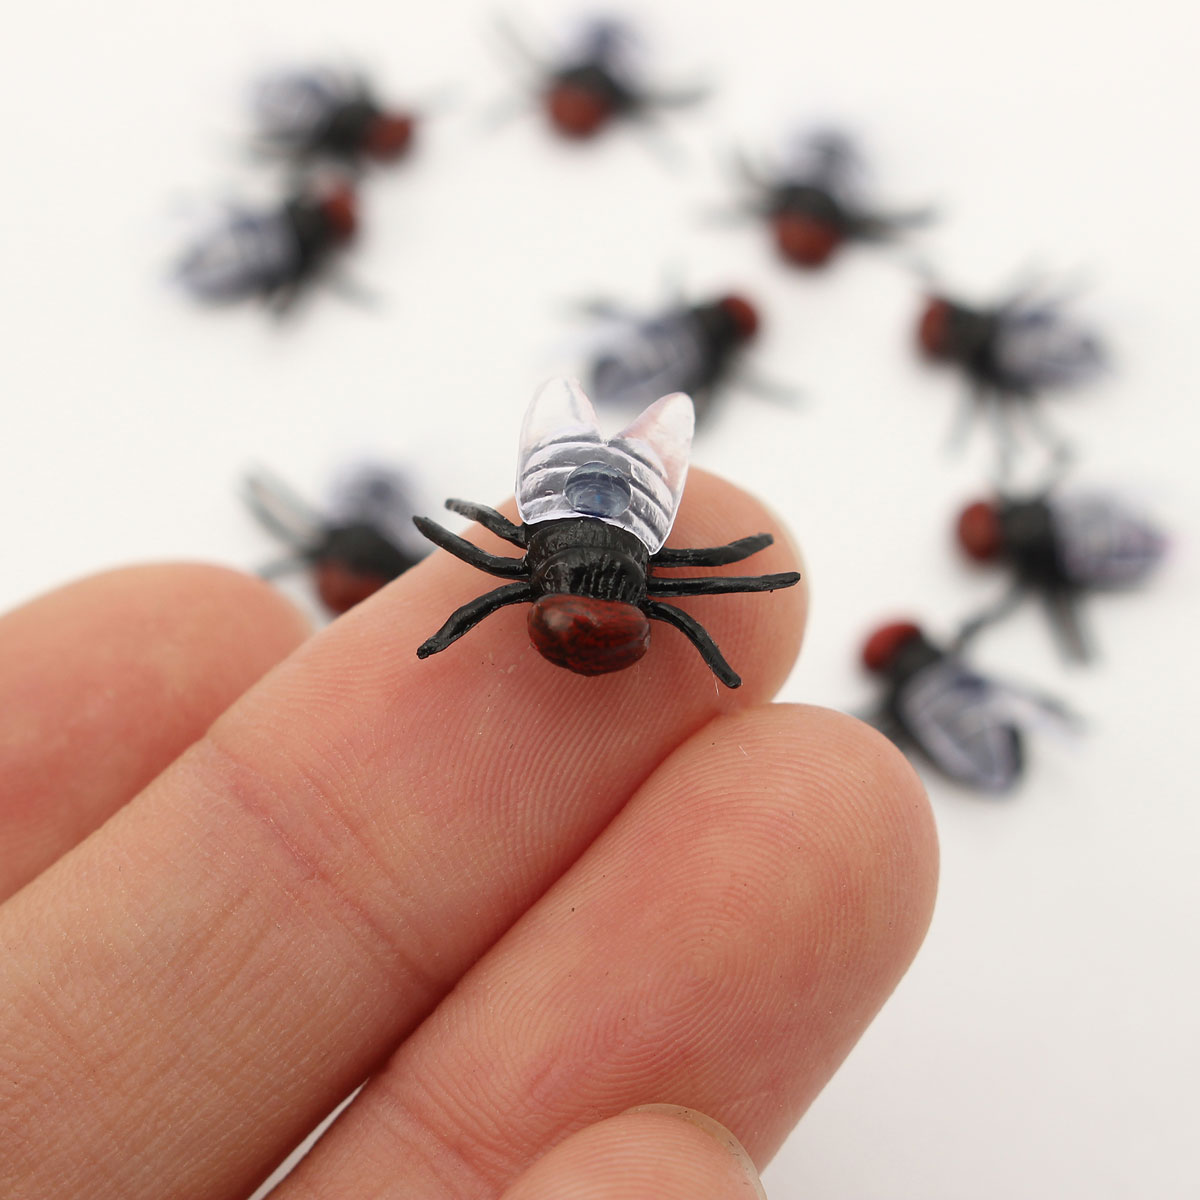 10PCS-April-Fools-Day-House-Fly-Animal-Toy-Joke-Prank-Funny-Magic-Props-Gifts-1104270